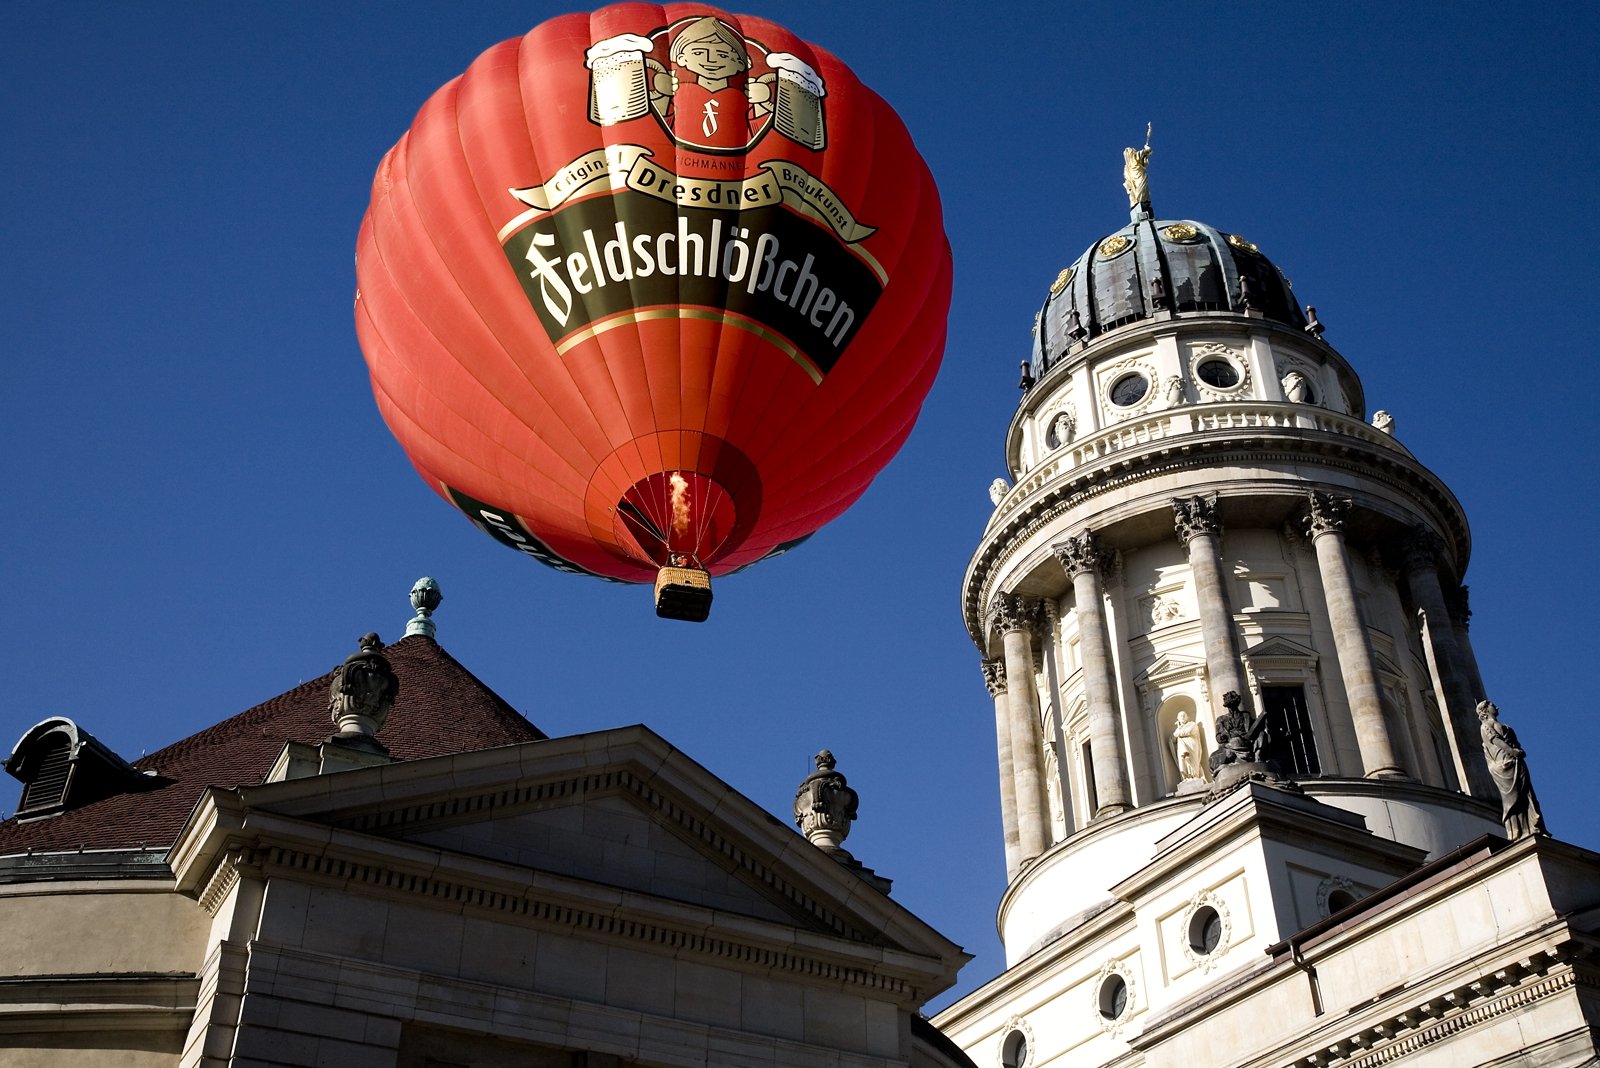 How to fly in a hot air balloon in Berlin